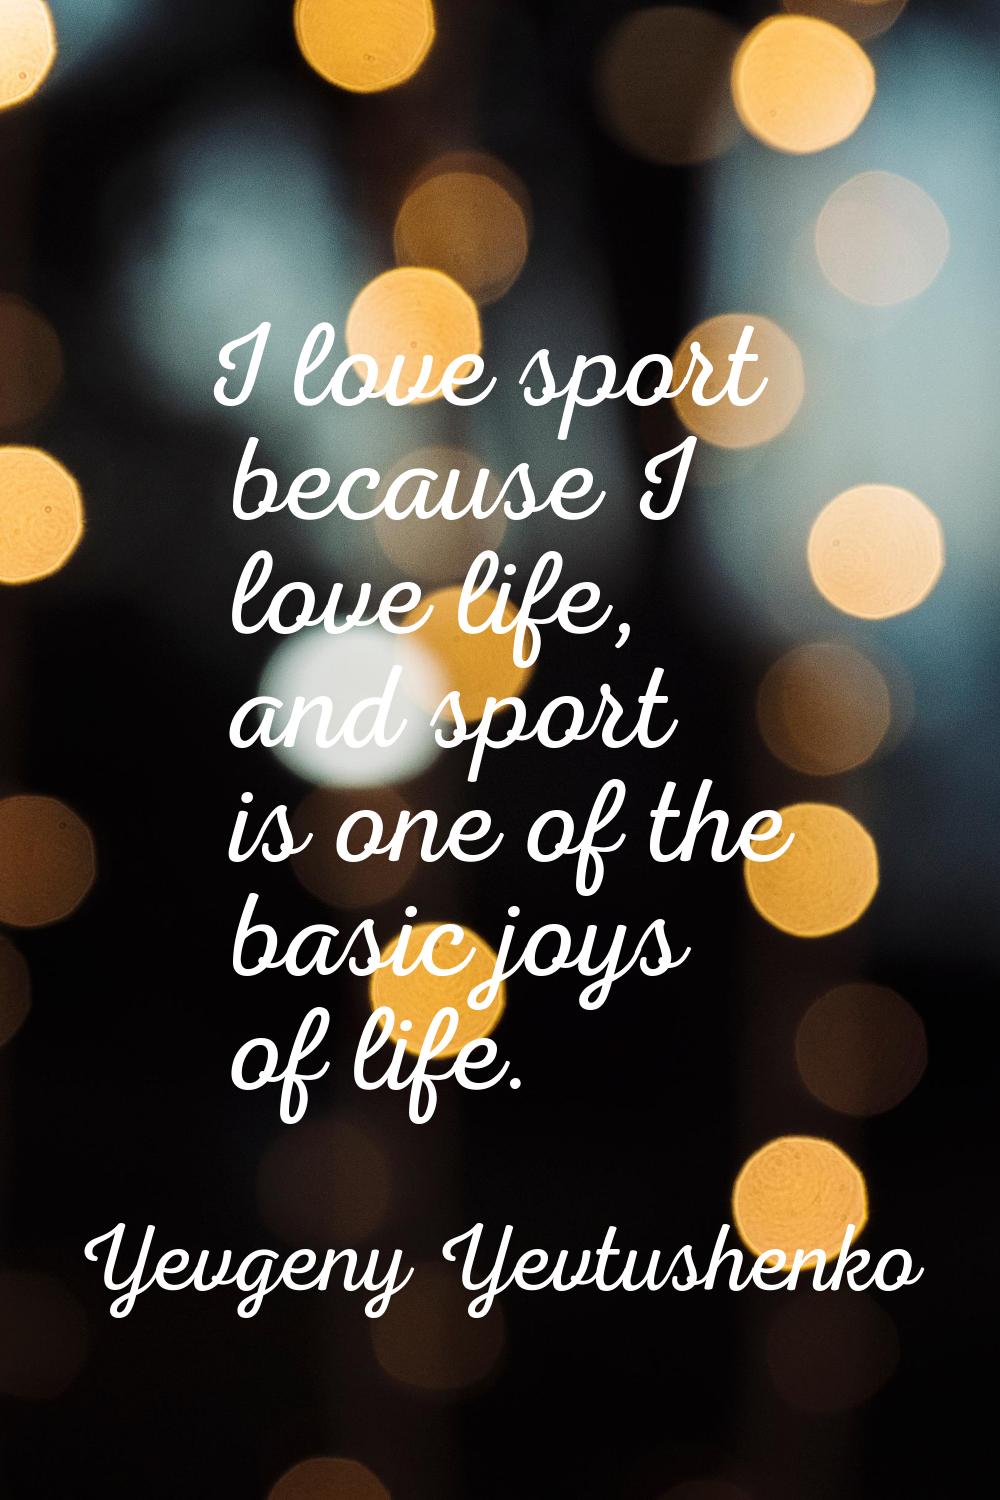 I love sport because I love life, and sport is one of the basic joys of life.